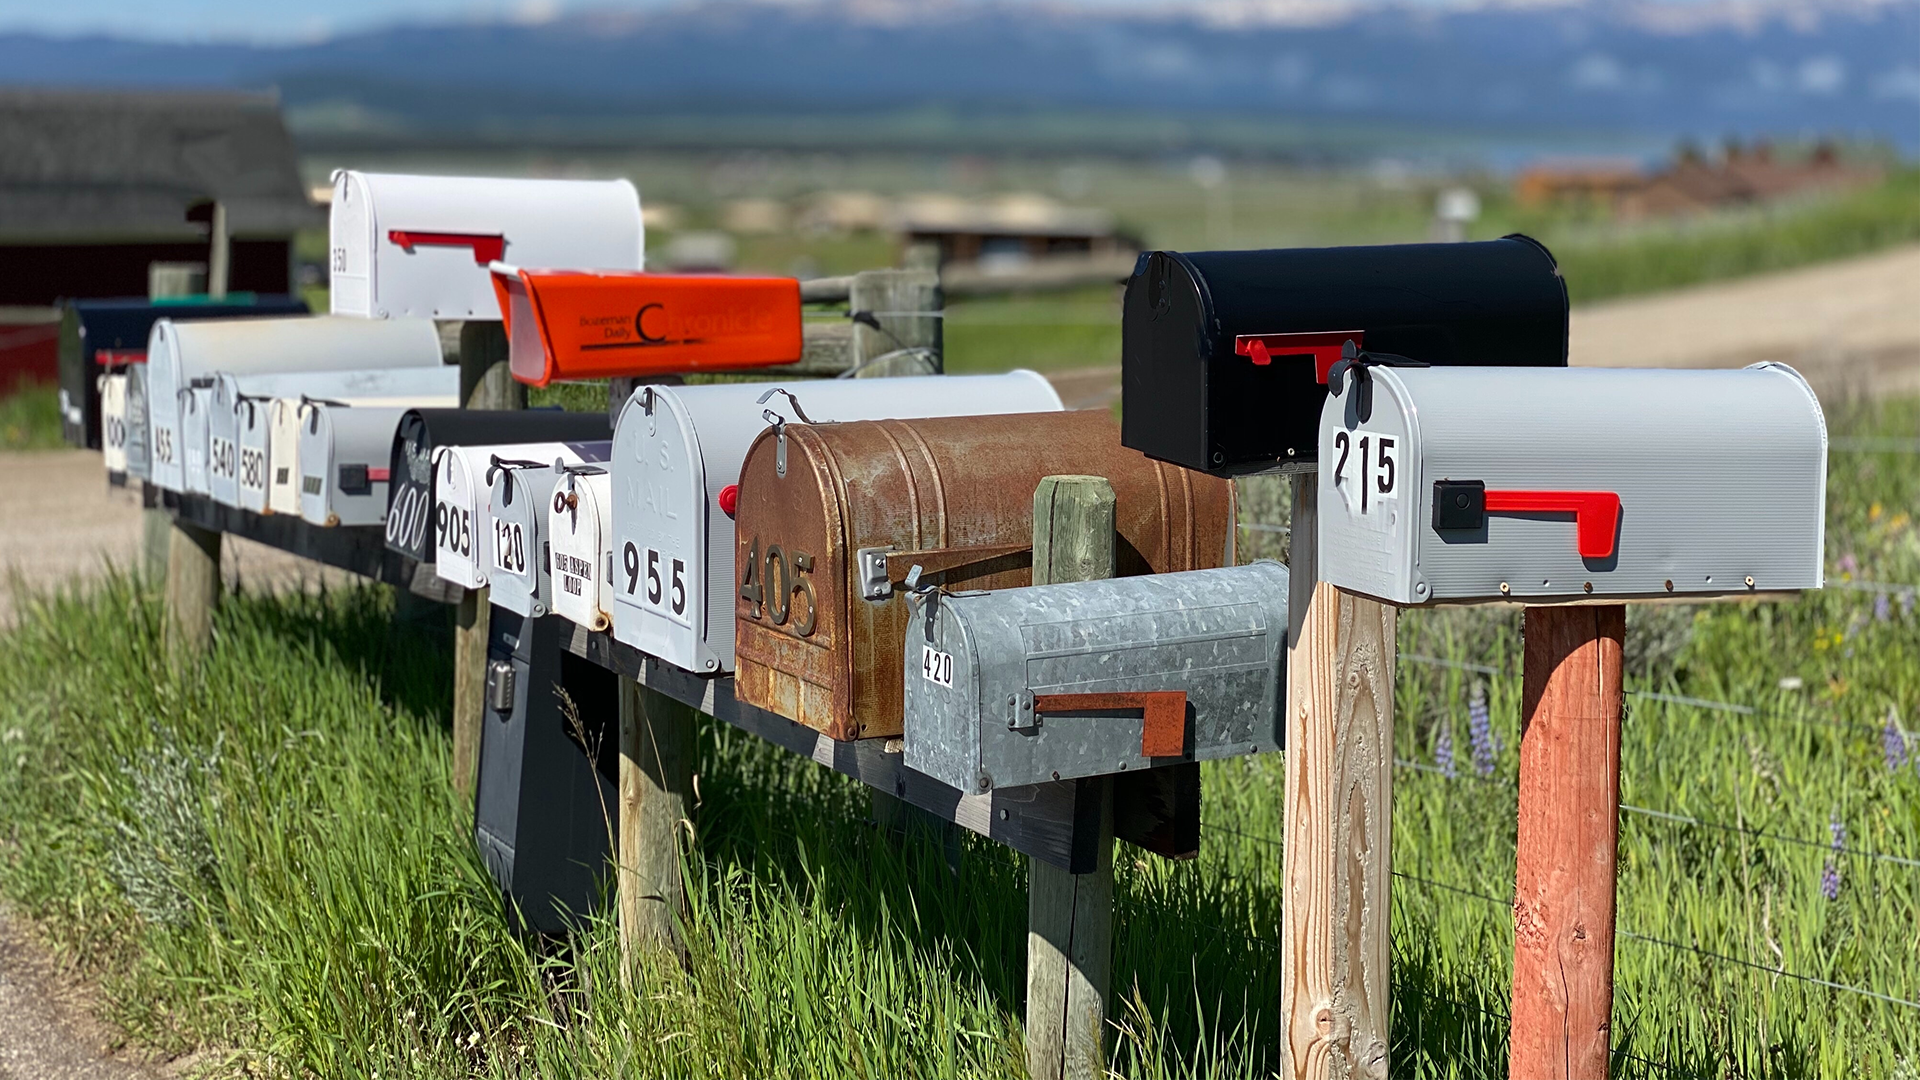 A row of mailboxes in the countryside